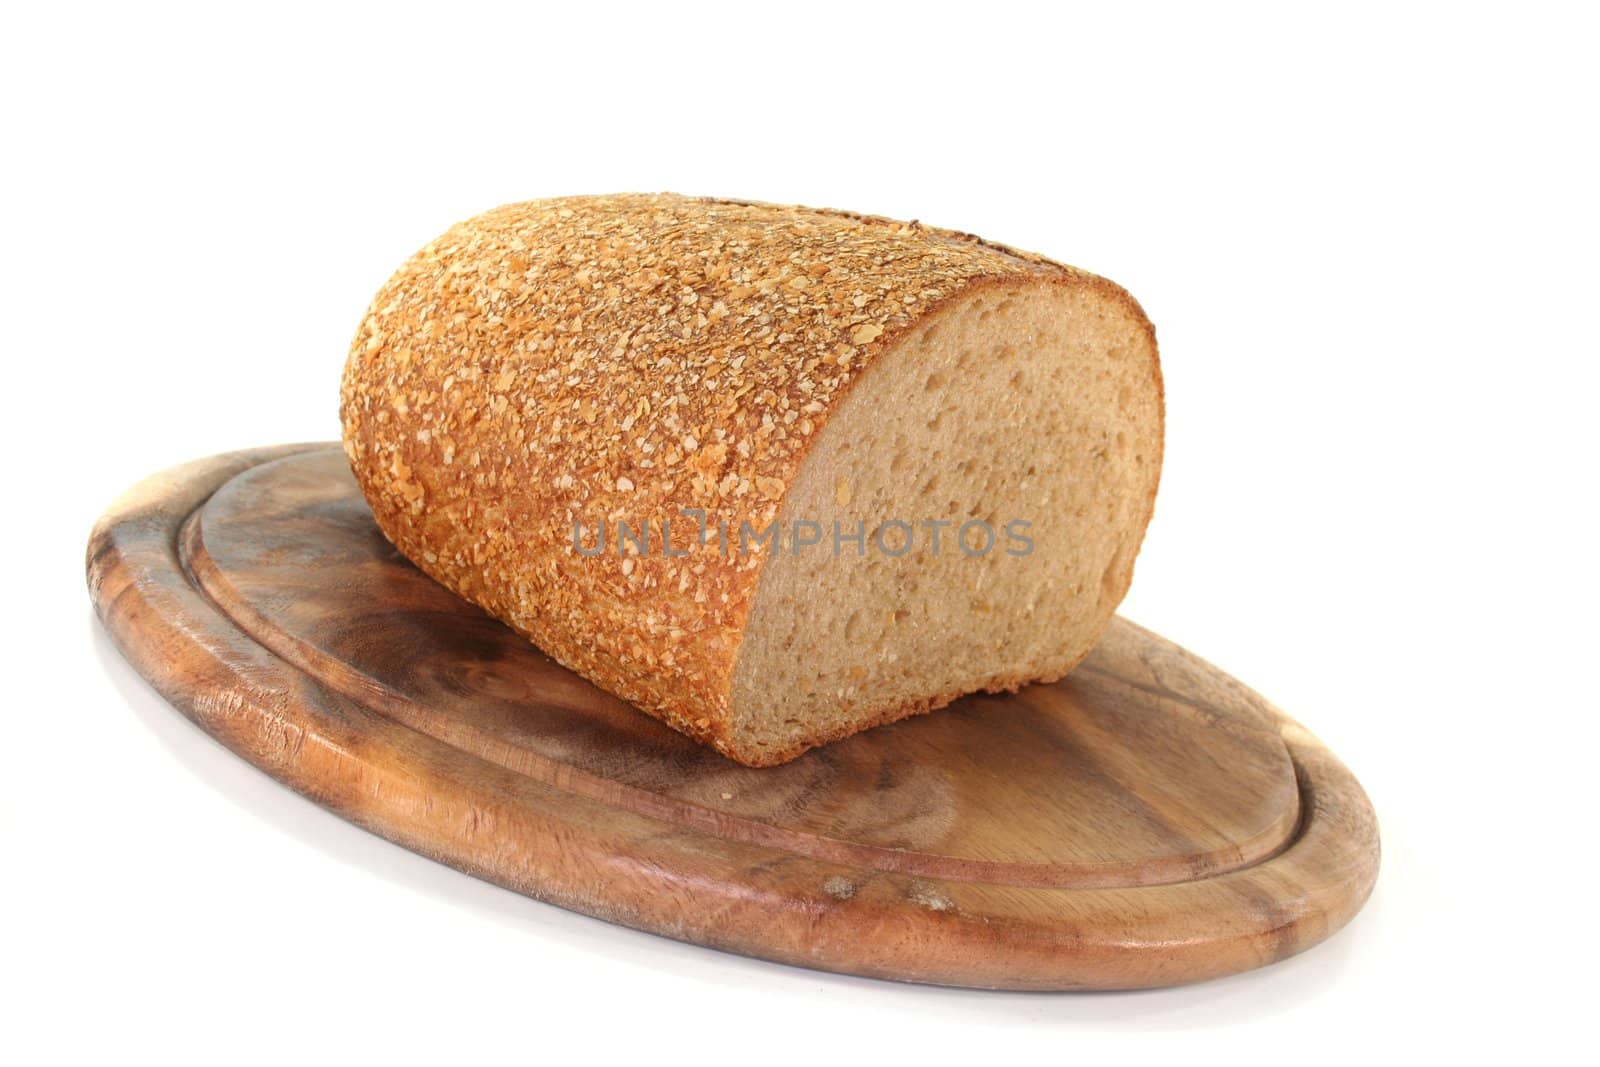 a crusty loaf of bread on a wooden board on white background